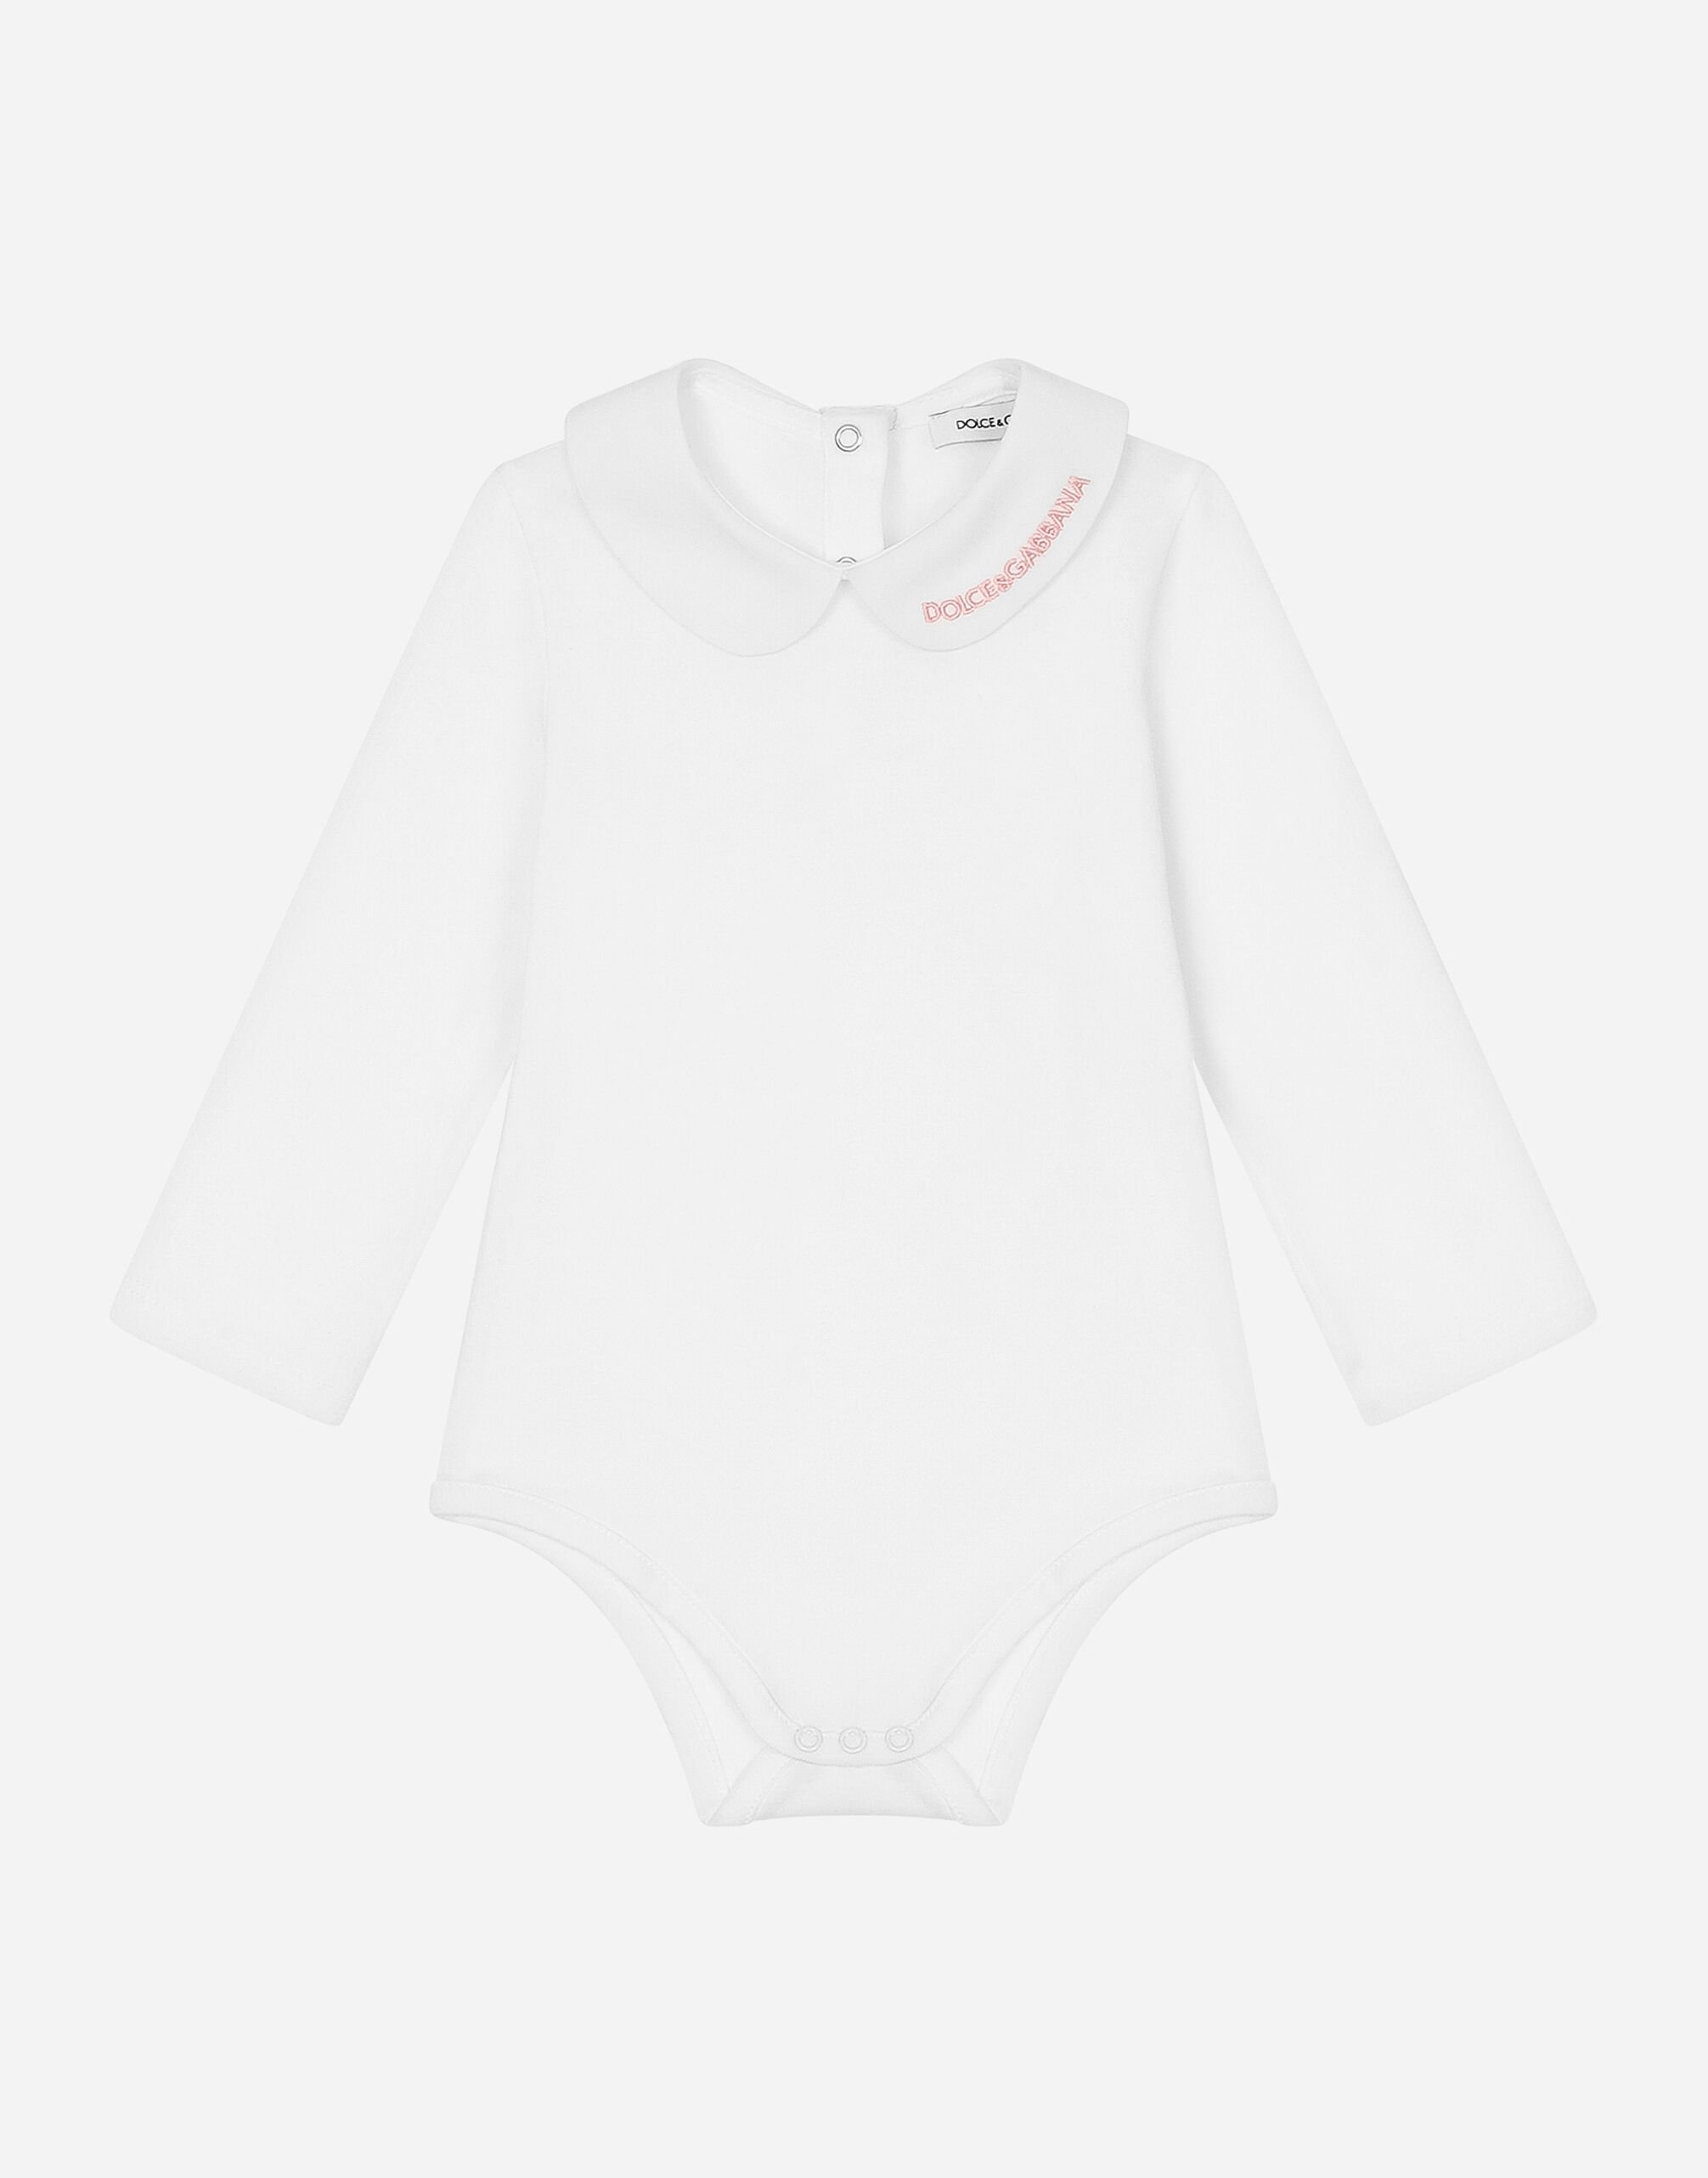 Dolce & Gabbana Long-sleeved babygrow with embroidered collar Black EB0003AB000